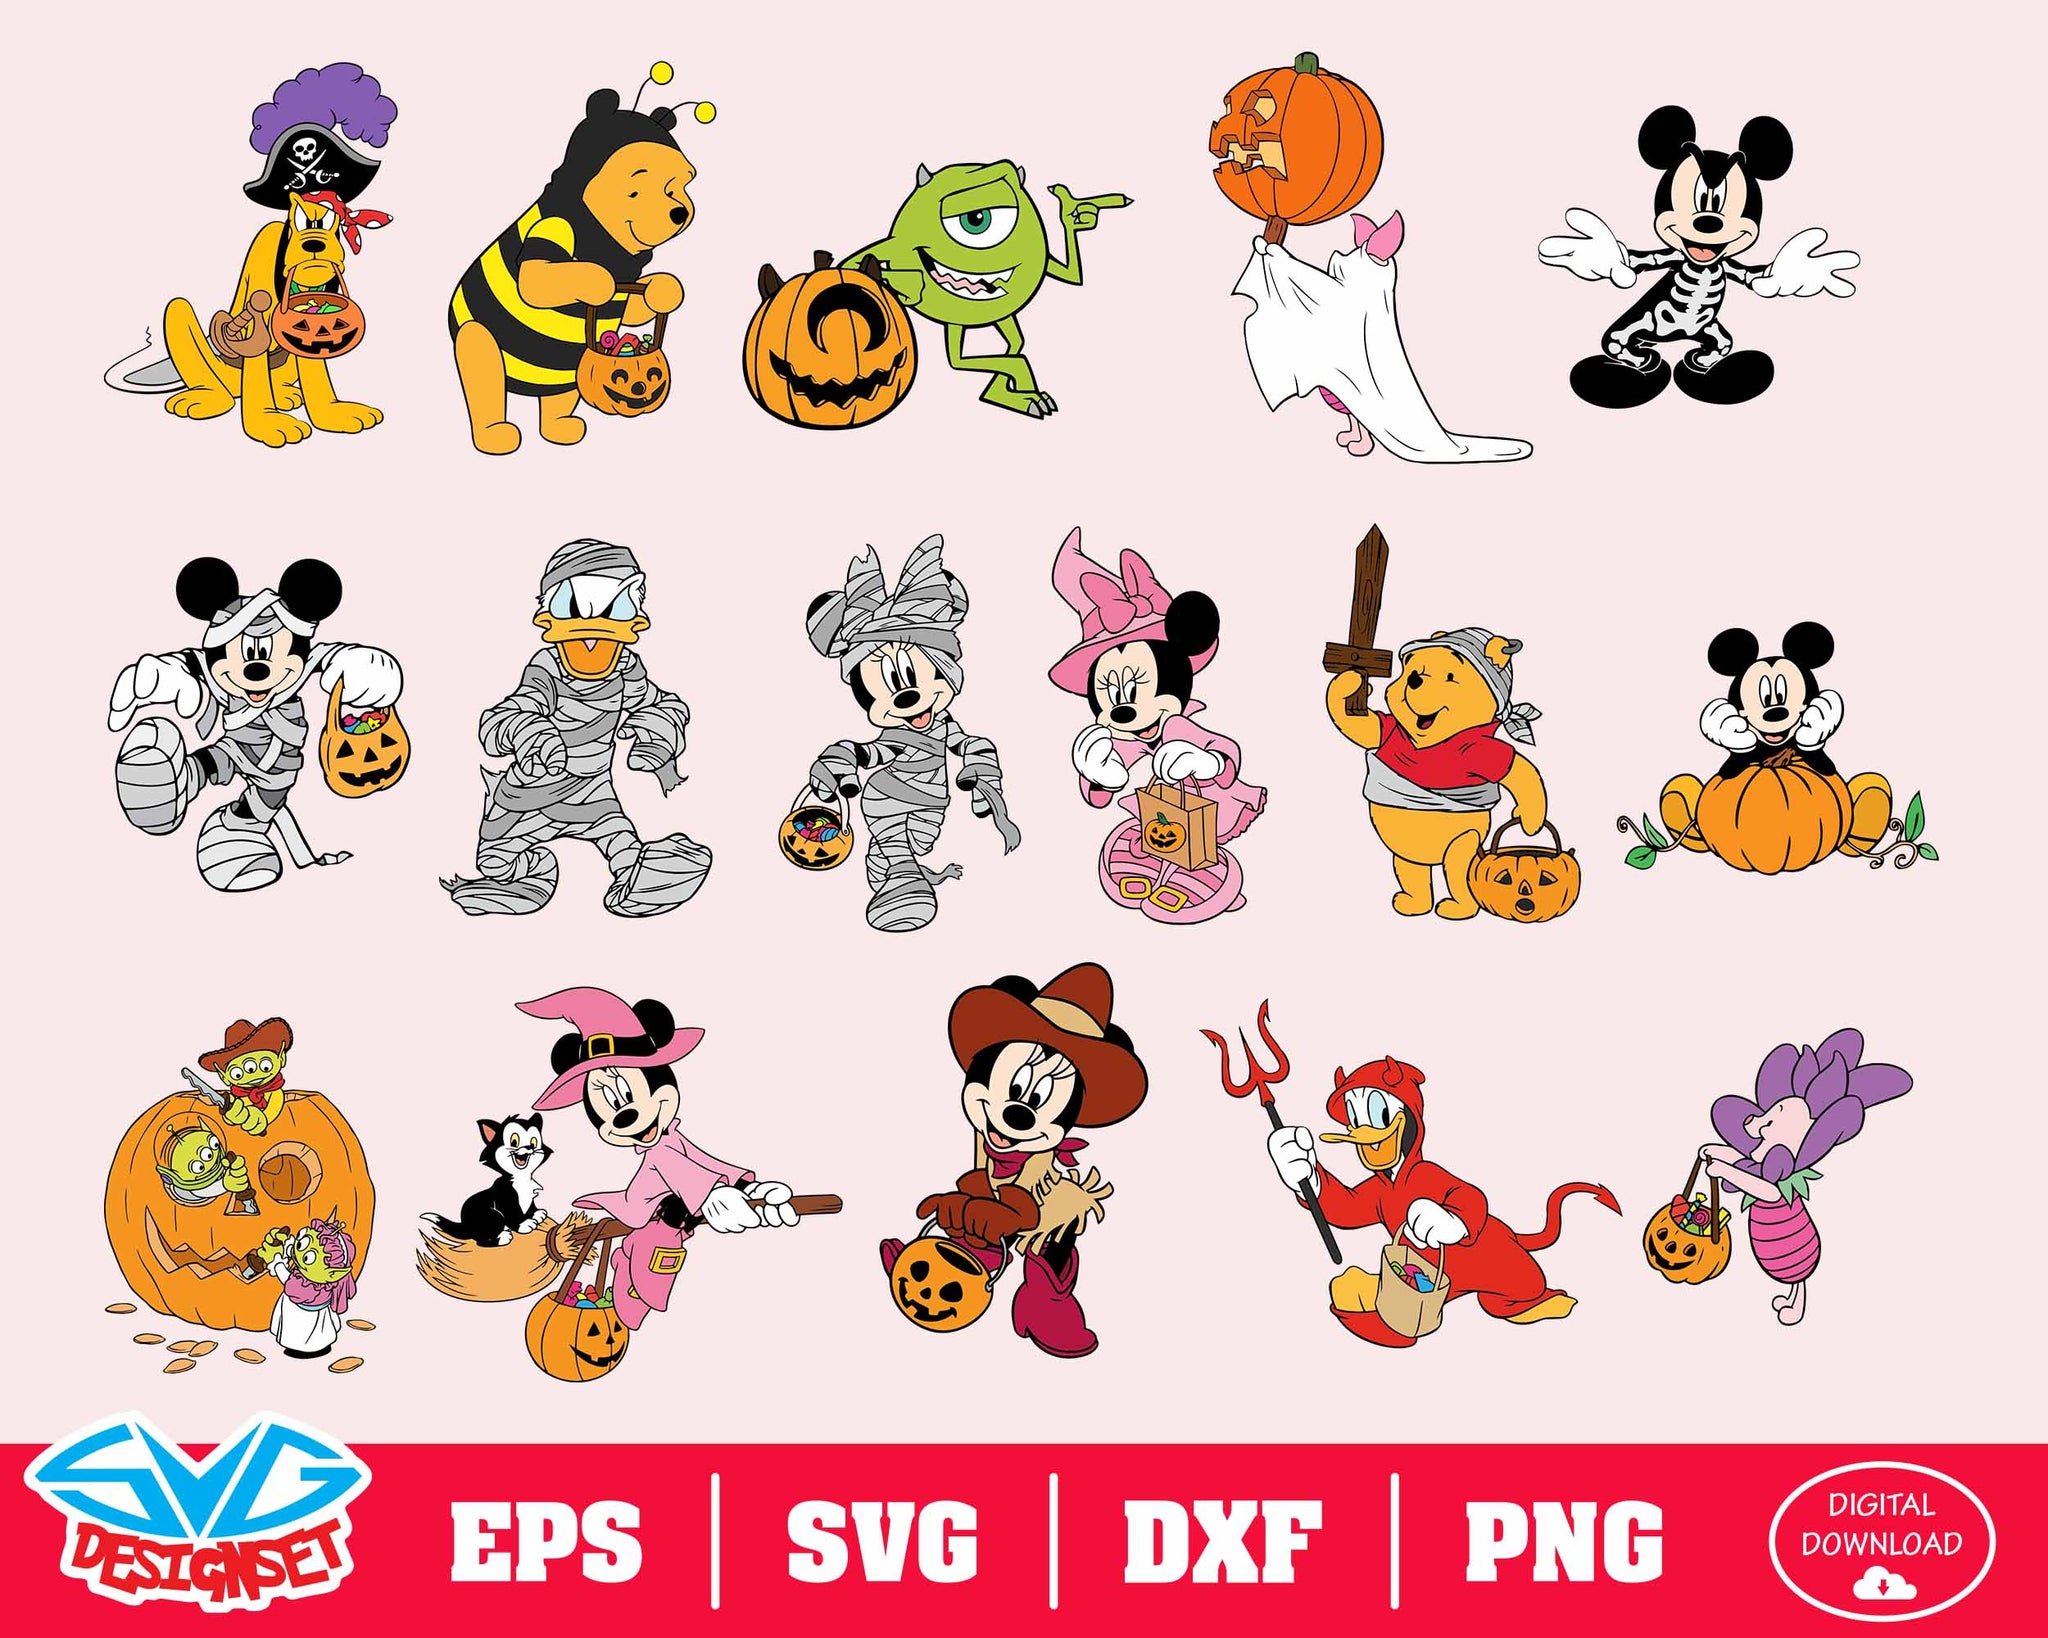 Disney Halloween Svg, Dxf, Eps, Png, Clipart, Silhouette and Cutfiles #4 - SVGDesignSets